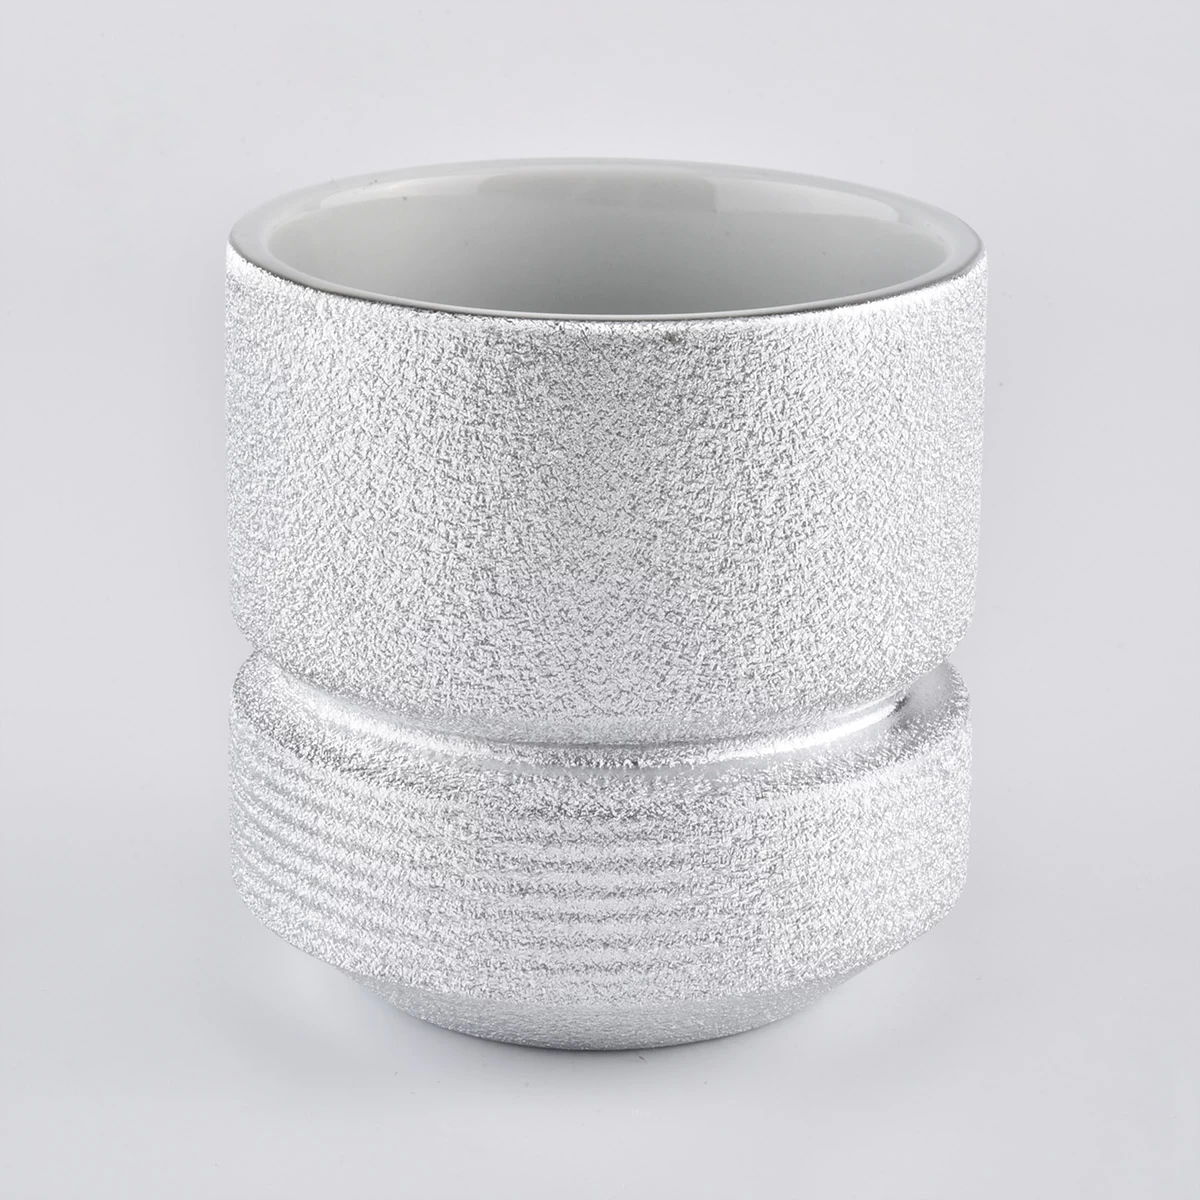 15oz silver ceramic round candle holders